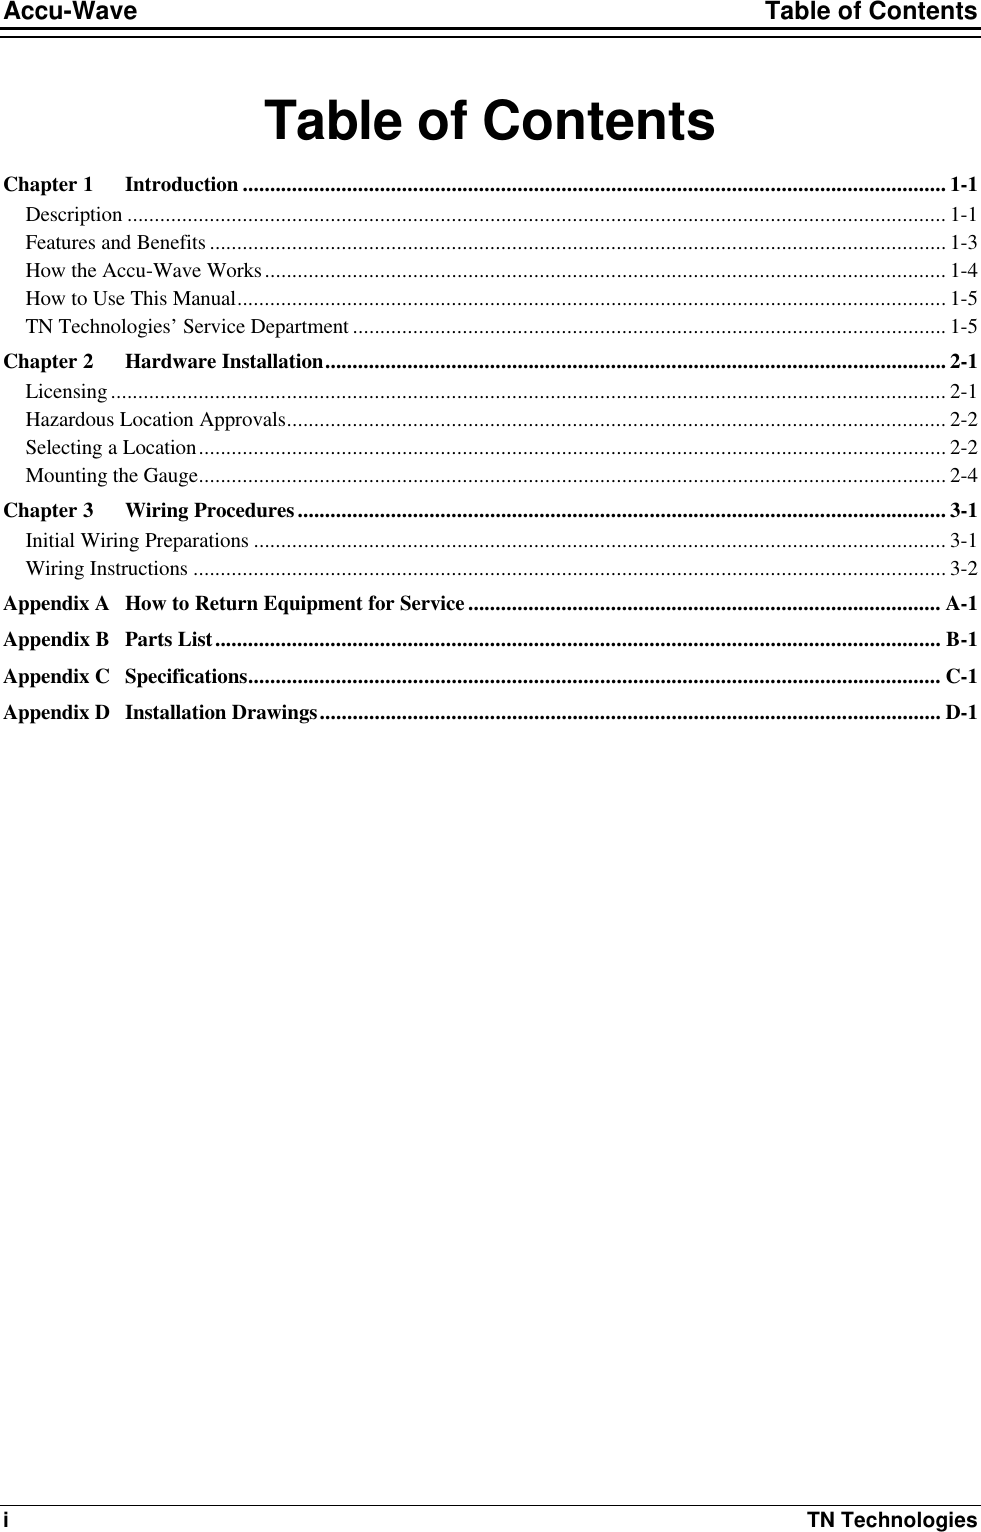 Accu-Wave Table of Contents i TN Technologies Table of Contents Chapter 1 Introduction ................................................................................................................................ 1-1 Description ..................................................................................................................................................... 1-1 Features and Benefits ...................................................................................................................................... 1-3 How the Accu-Wave Works............................................................................................................................ 1-4 How to Use This Manual................................................................................................................................. 1-5 TN Technologies’ Service Department ............................................................................................................ 1-5 Chapter 2 Hardware Installation................................................................................................................. 2-1 Licensing........................................................................................................................................................ 2-1 Hazardous Location Approvals........................................................................................................................ 2-2 Selecting a Location........................................................................................................................................ 2-2 Mounting the Gauge........................................................................................................................................ 2-4 Chapter 3 Wiring Procedures...................................................................................................................... 3-1 Initial Wiring Preparations .............................................................................................................................. 3-1 Wiring Instructions ......................................................................................................................................... 3-2 Appendix A How to Return Equipment for Service ...................................................................................... A-1 Appendix B Parts List.................................................................................................................................... B-1 Appendix C Specifications.............................................................................................................................. C-1 Appendix D Installation Drawings................................................................................................................. D-1 